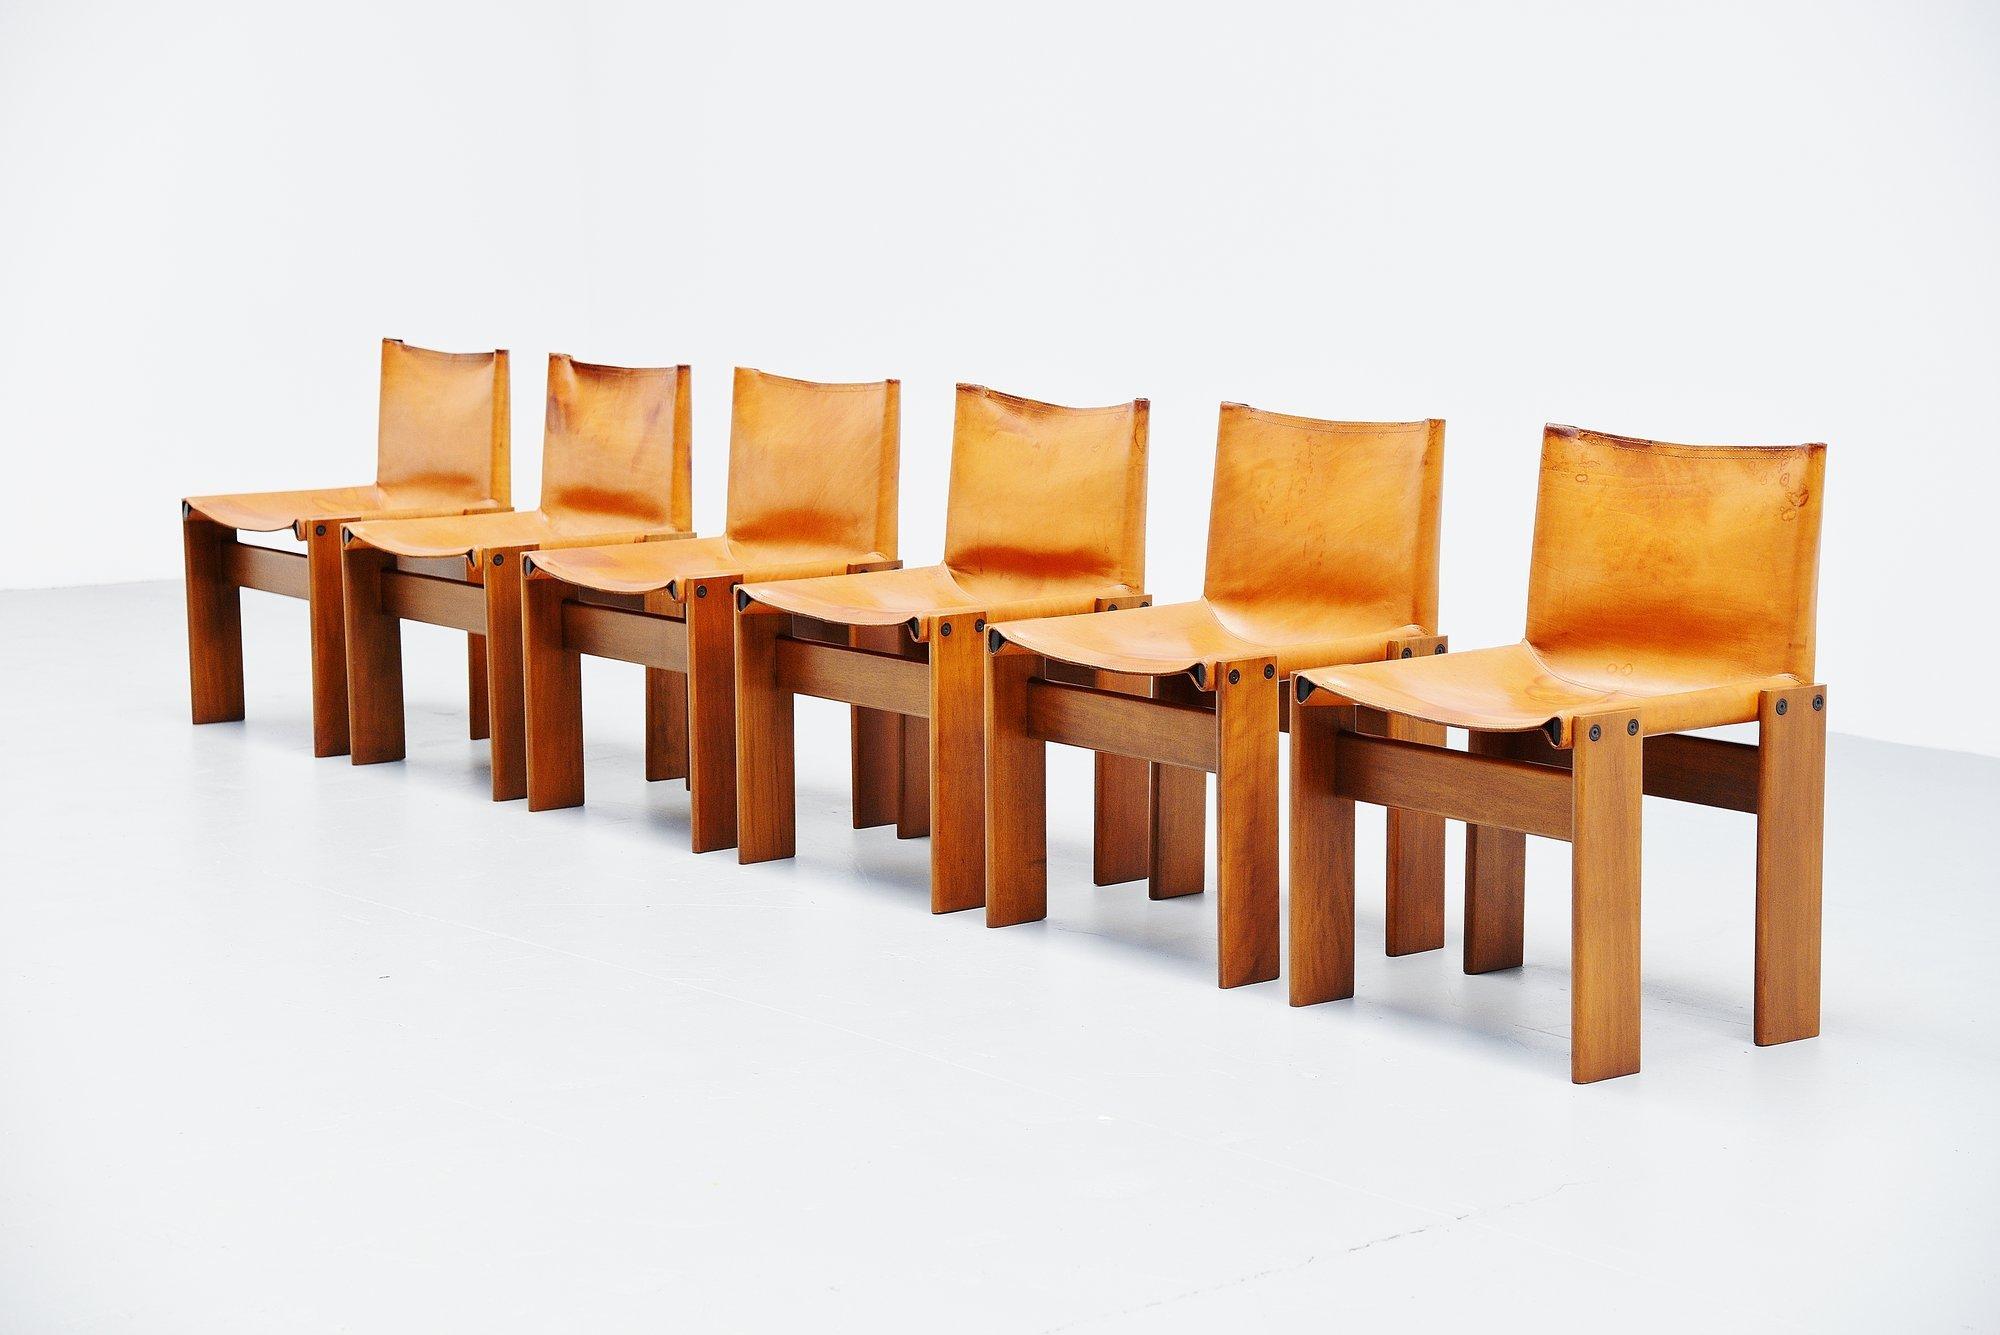 Spectacular set of 6 'Monk' chairs designed by Afra e Tobia Scarpa and manufactured by Molteni, Italy 1974. This is for a set of 6 chairs with solid walnut wooden frames and beautiful patinated natural leather seats. These chairs look really amazing